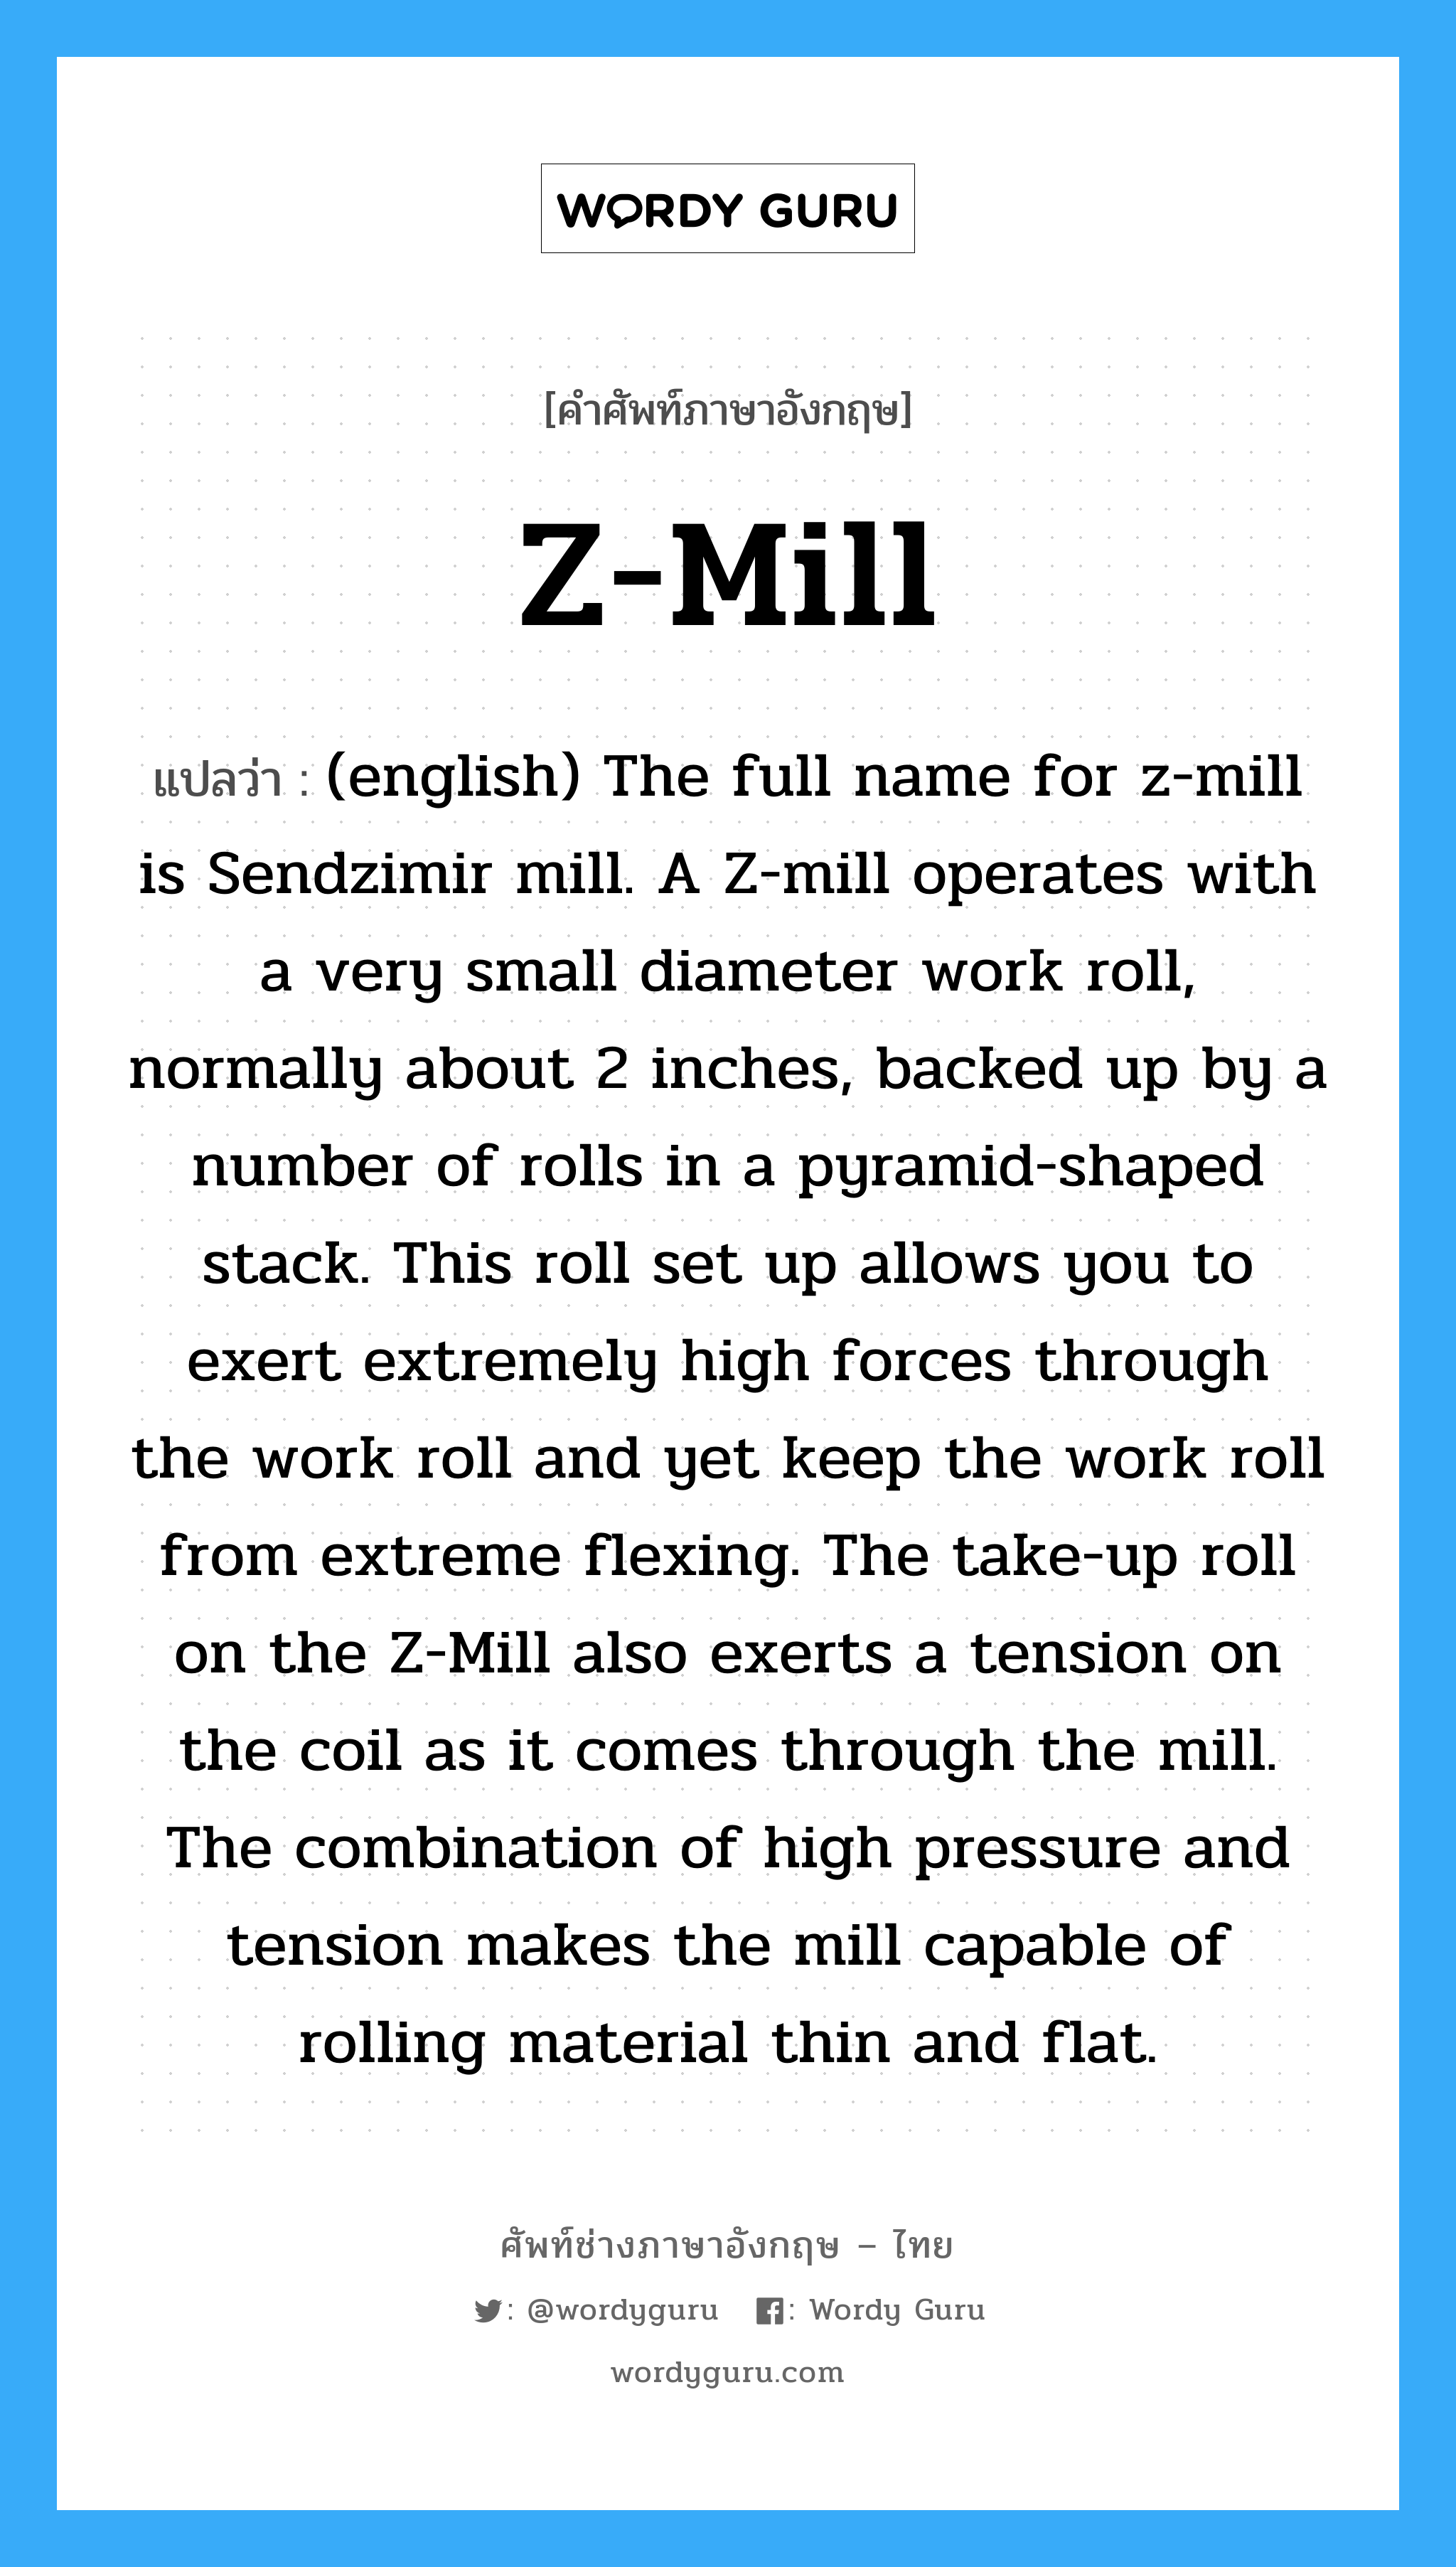 Z-Mill แปลว่า?, คำศัพท์ช่างภาษาอังกฤษ - ไทย Z-Mill คำศัพท์ภาษาอังกฤษ Z-Mill แปลว่า (english) The full name for z-mill is Sendzimir mill. A Z-mill operates with a very small diameter work roll, normally about 2 inches, backed up by a number of rolls in a pyramid-shaped stack. This roll set up allows you to exert extremely high forces through the work roll and yet keep the work roll from extreme flexing. The take-up roll on the Z-Mill also exerts a tension on the coil as it comes through the mill. The combination of high pressure and tension makes the mill capable of rolling material thin and flat.